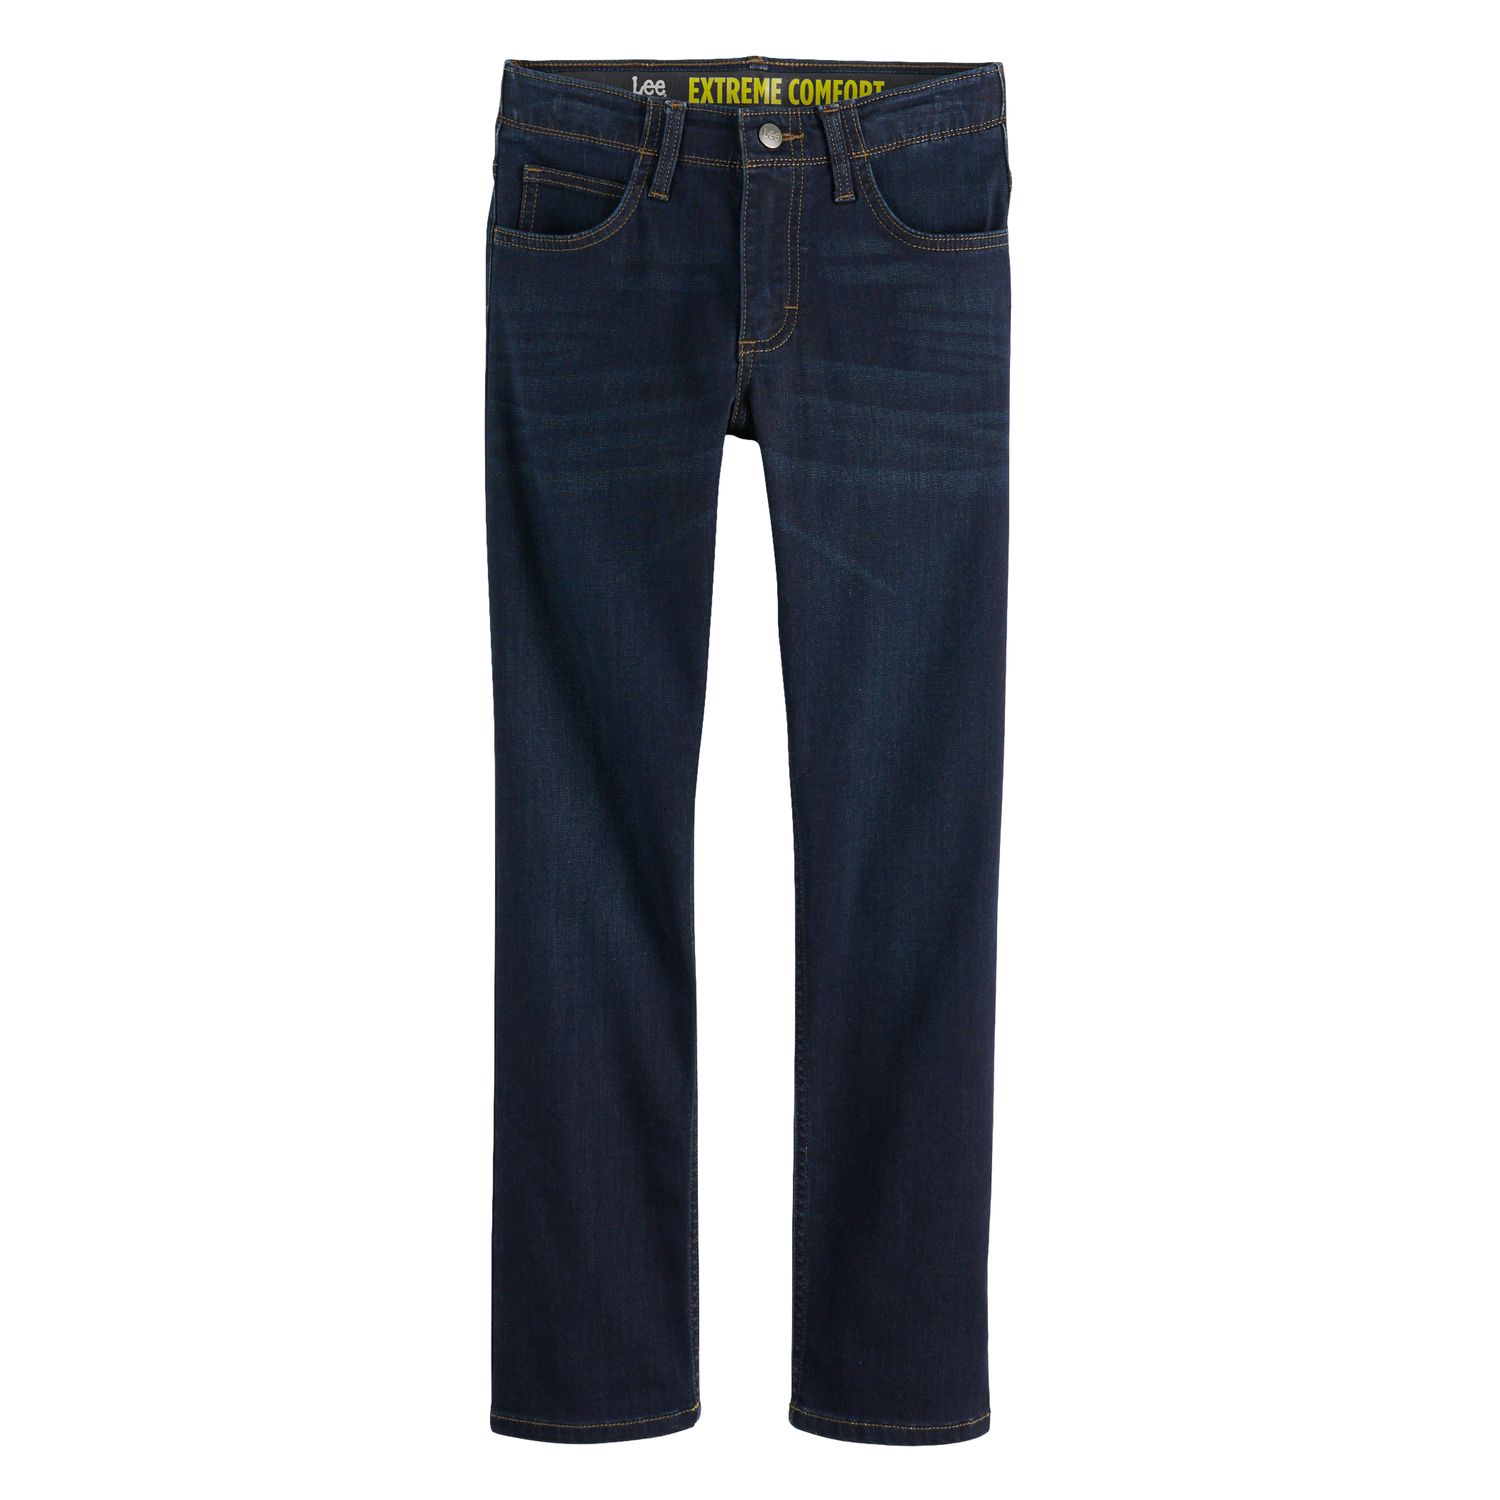 jcpenney lee carpenter jeans